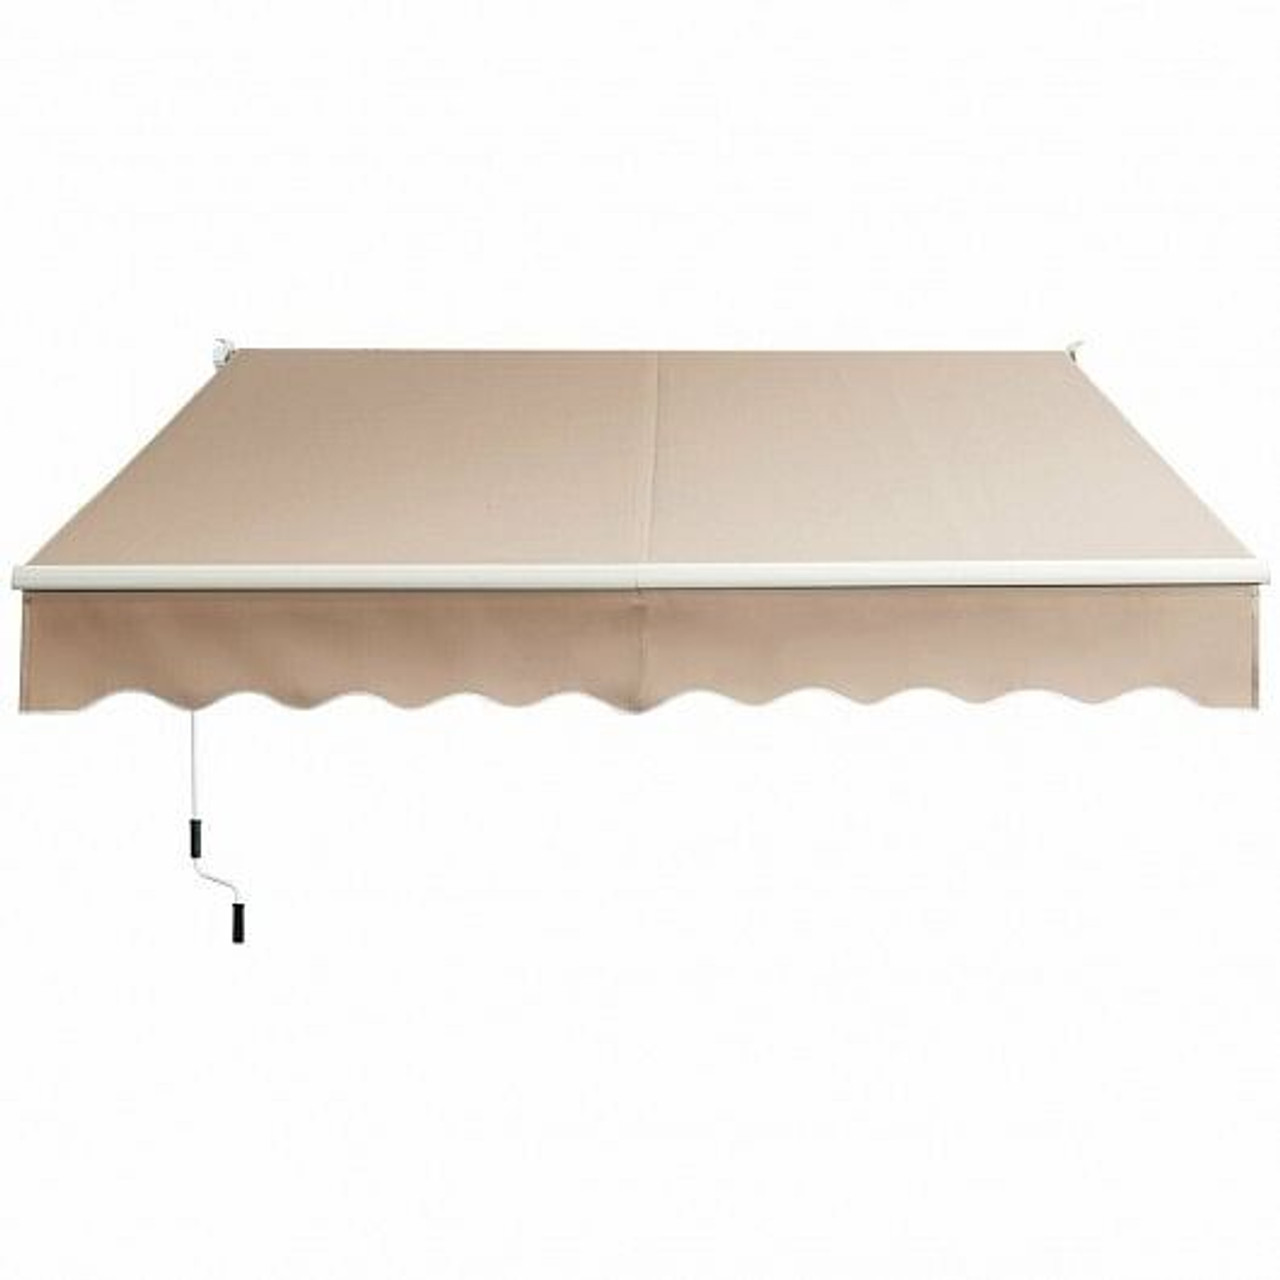 10 x 8.2 Feet Retractable Awning with Easy Opening Manual Crank Handle-Beige